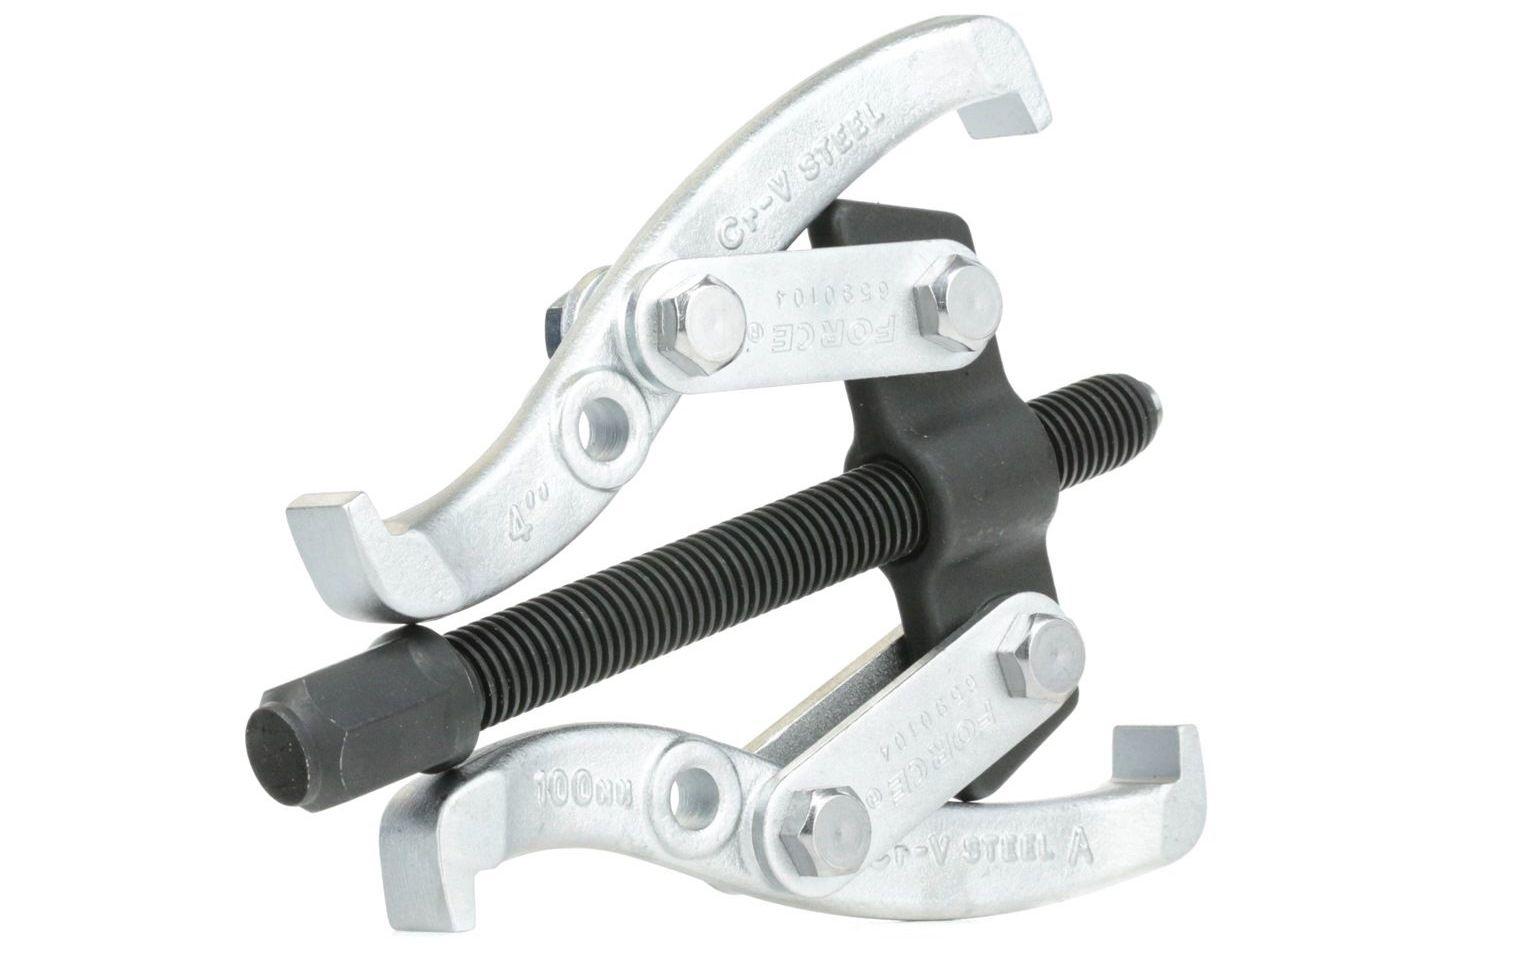 Rating of the 3 Best Force Bearing Pullers: Features, Pros and Cons